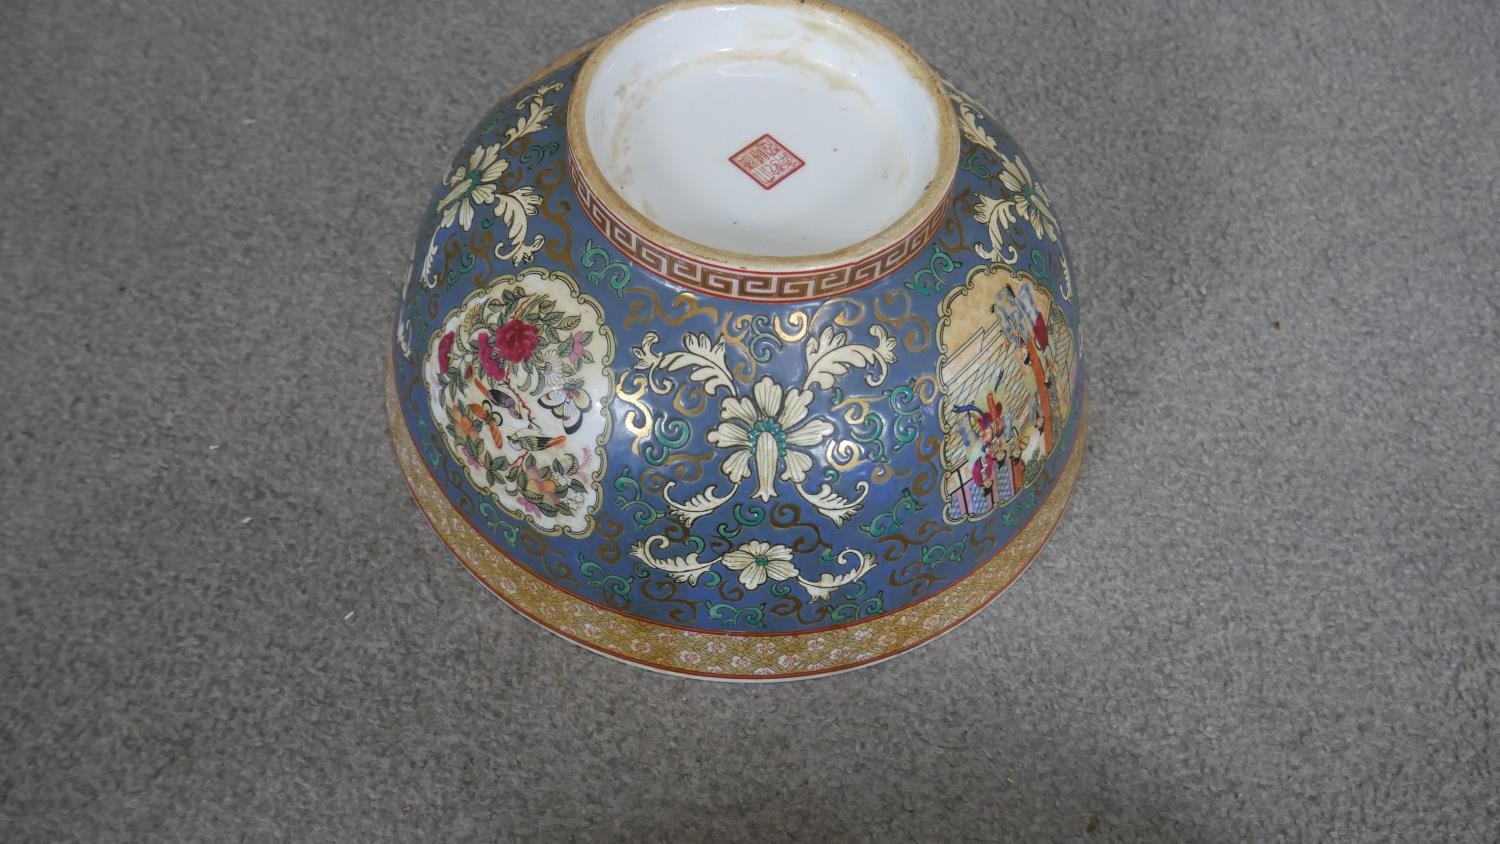 A 20th century Chinese porcelain hand painted bowl decorated with temple scenes, abstract patterns - Image 4 of 5